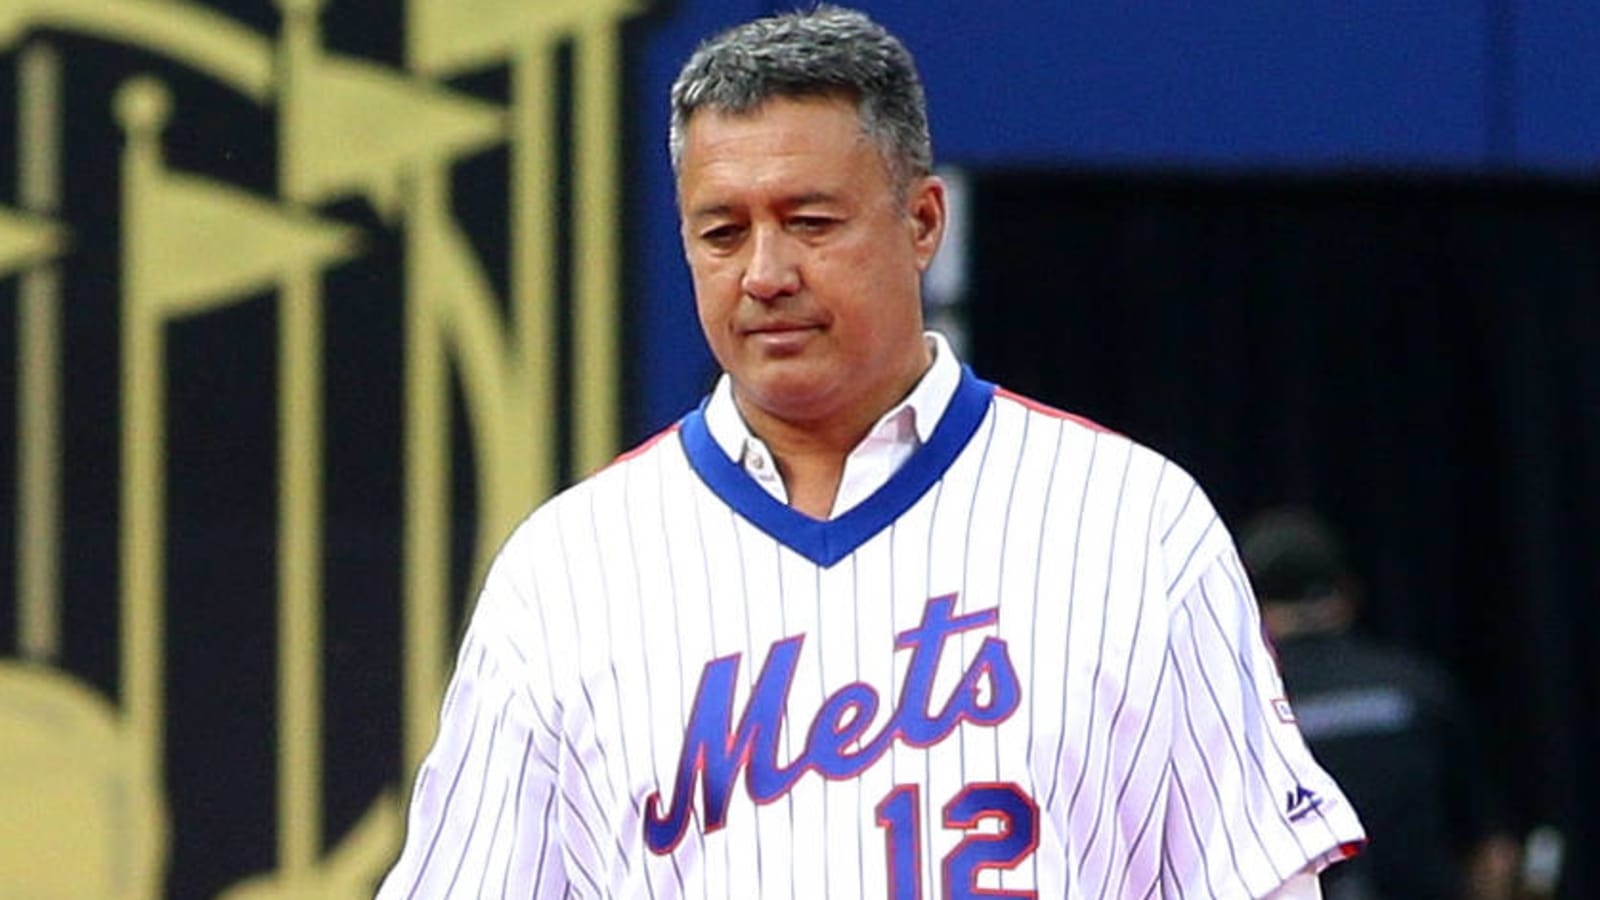 Ron Darling diagnosed with ‘treatable’ thyroid cancer